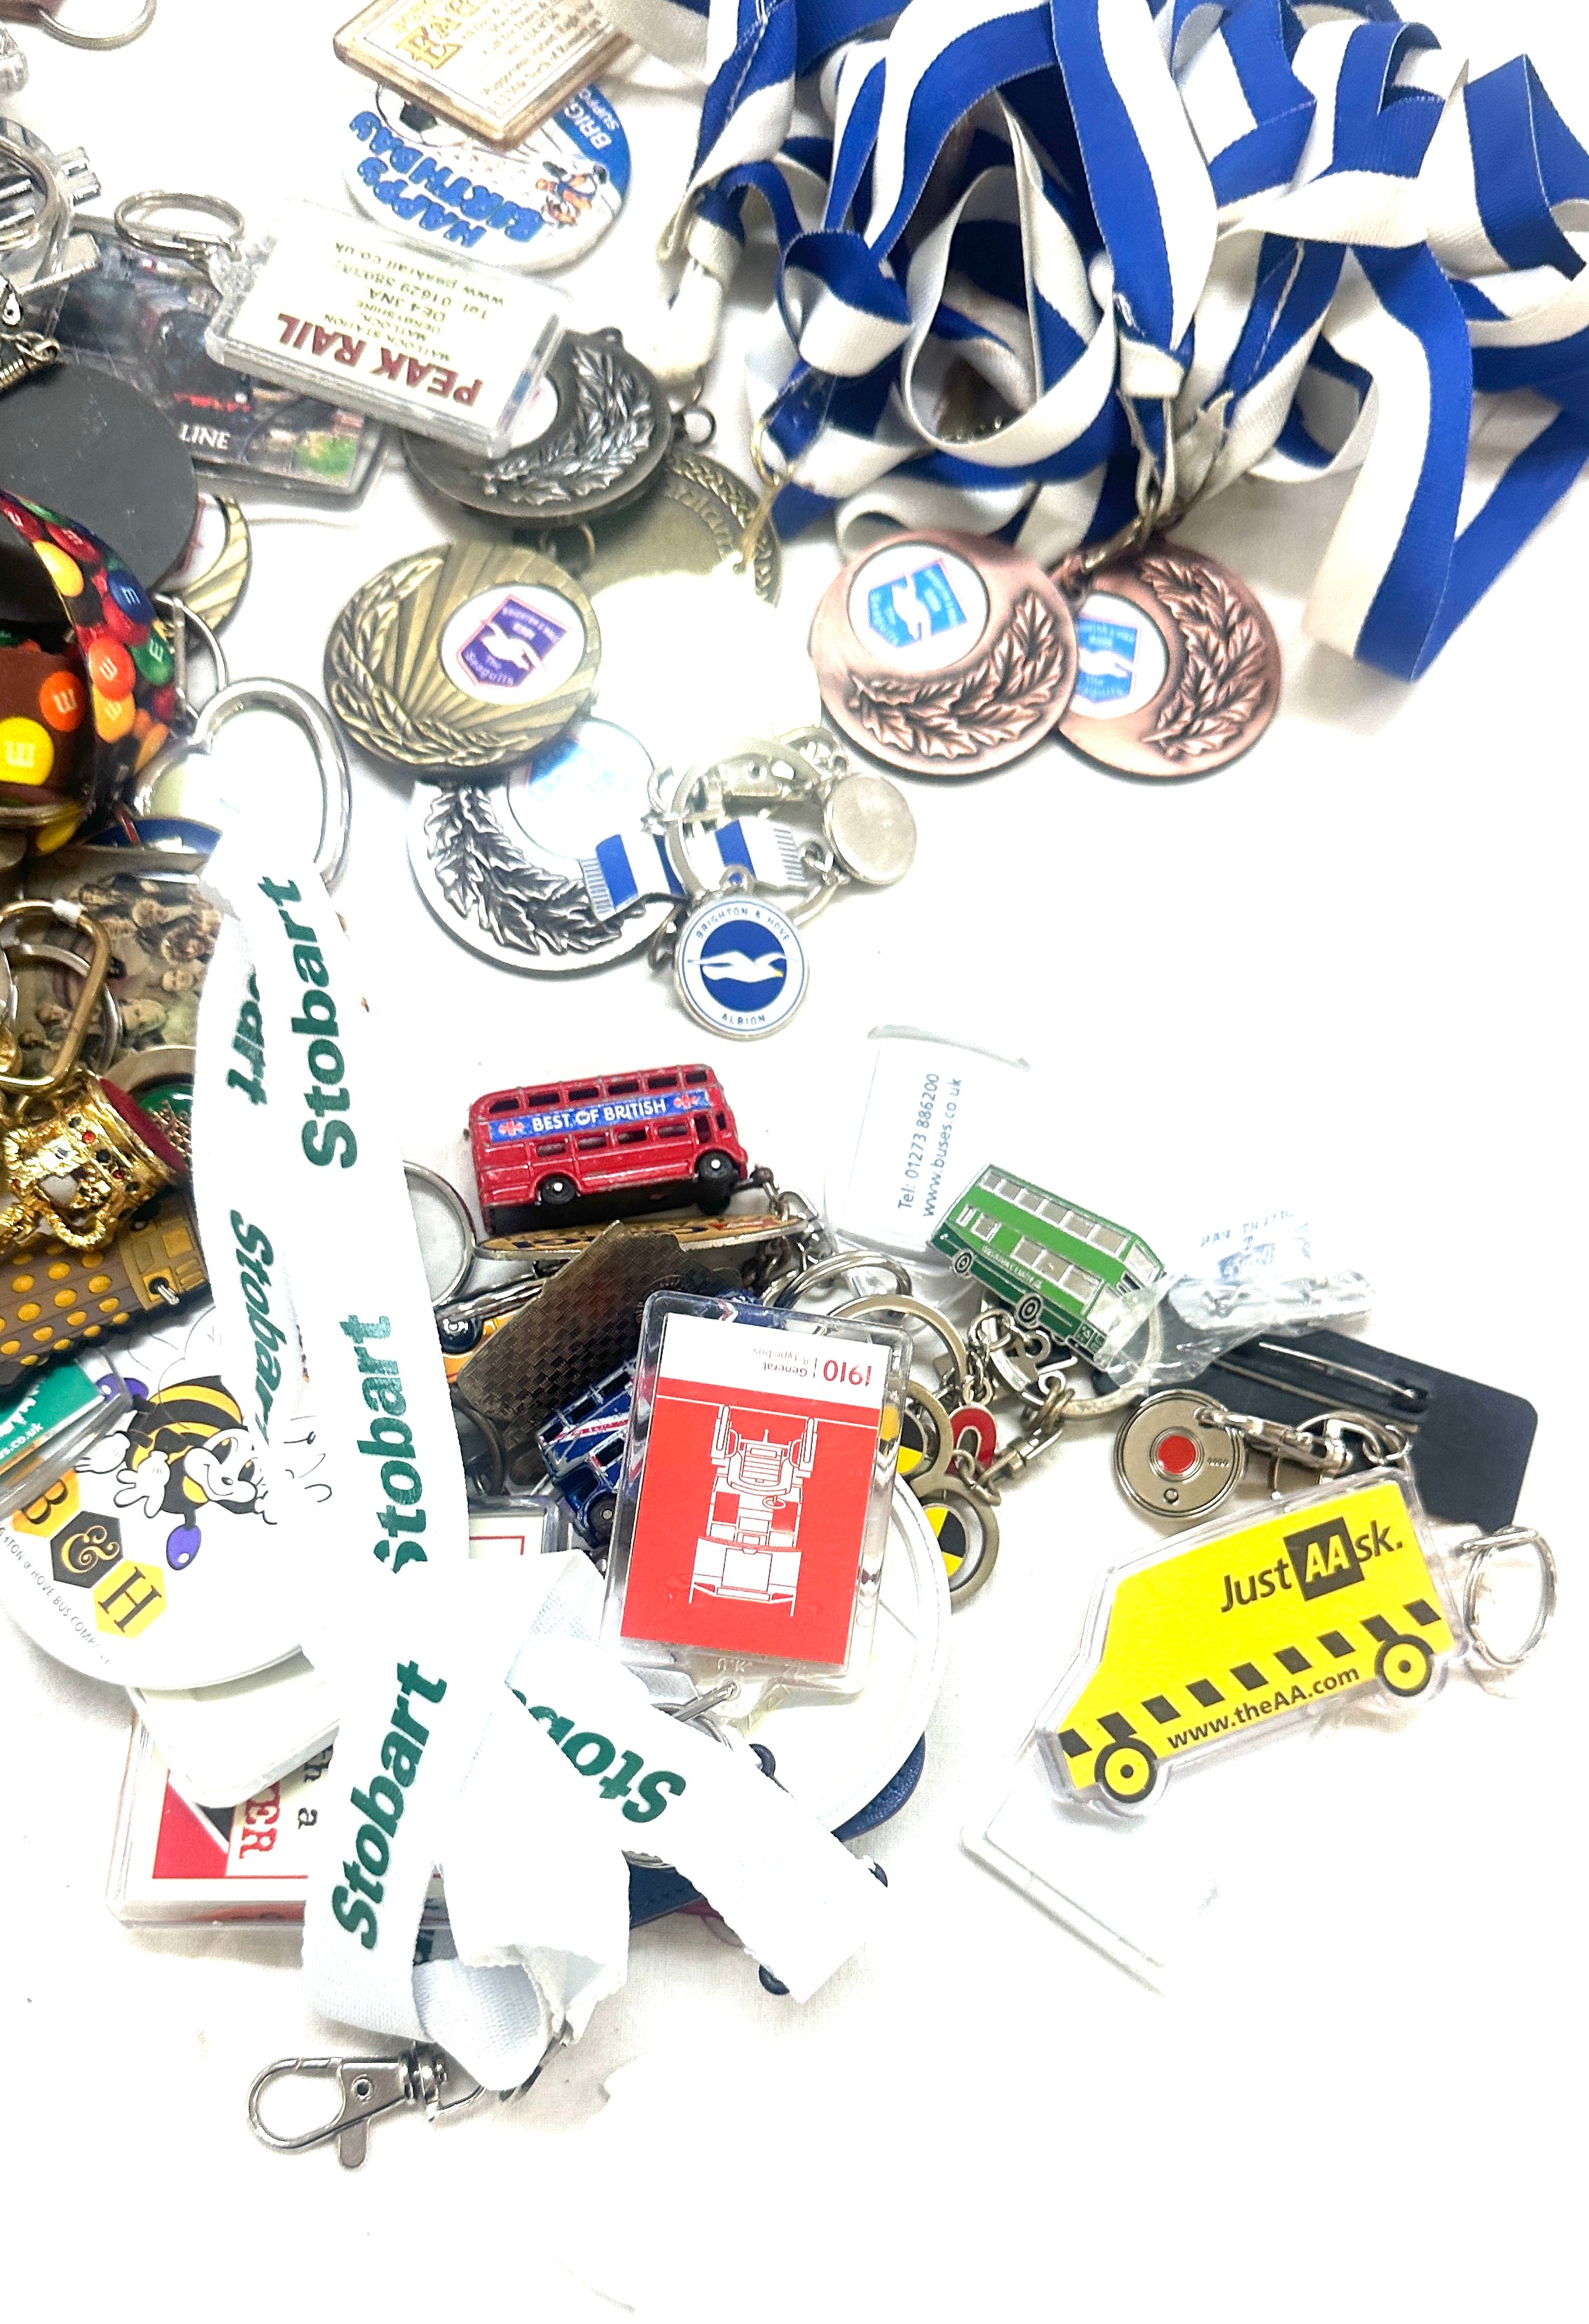 Selection of key rings includes transport models, planes, dr who, coca cola etc - Image 4 of 5